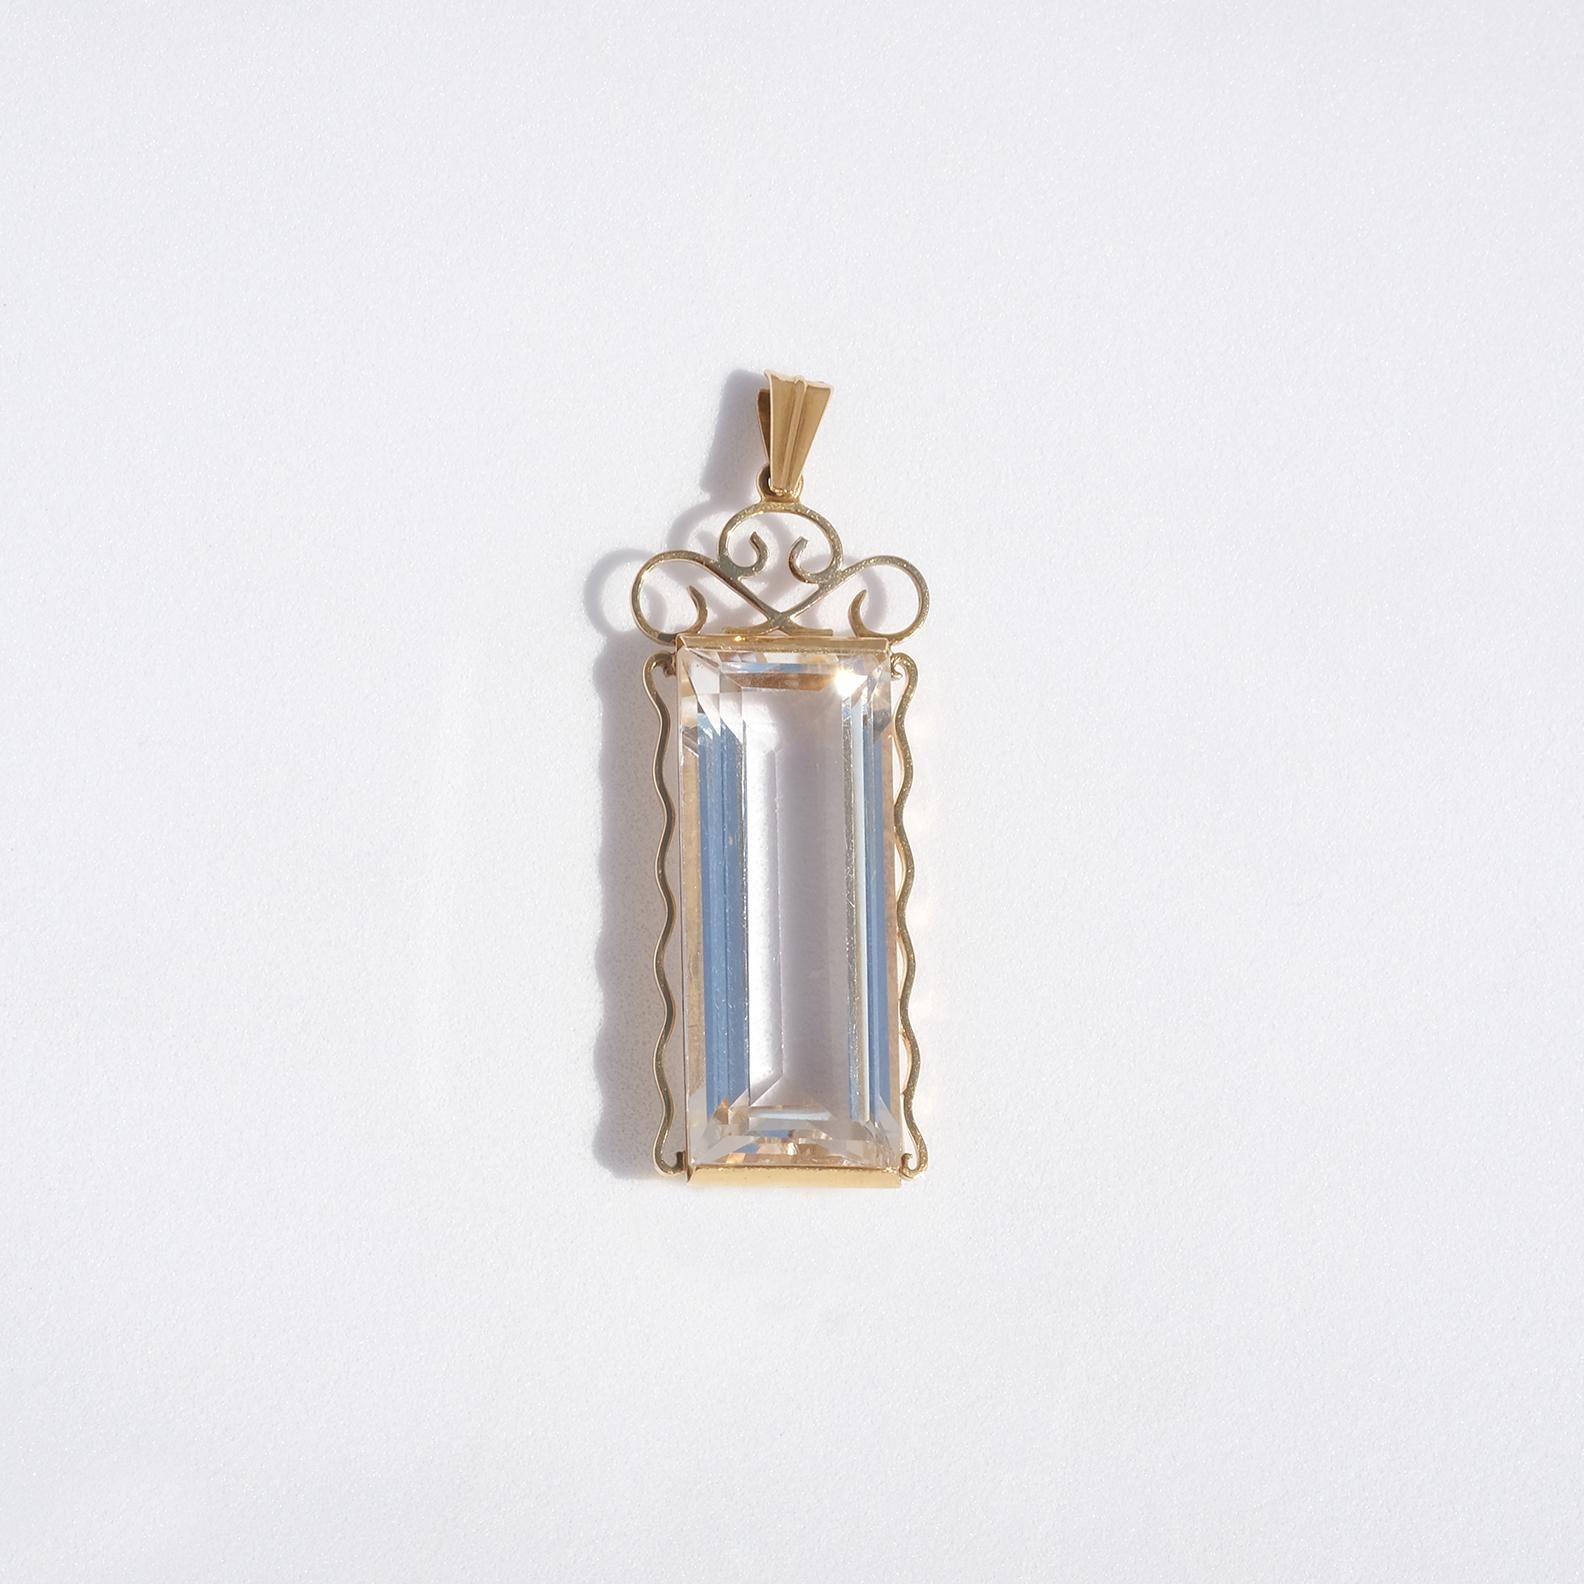 This 18 karat gold pendant has a faceted baguette cut rock crystal which is embraced by a beautiful pattern resembling a royal monogram. 

The pendant shows upon elegance and it fits well in both an everyday environment as well as in a more festive